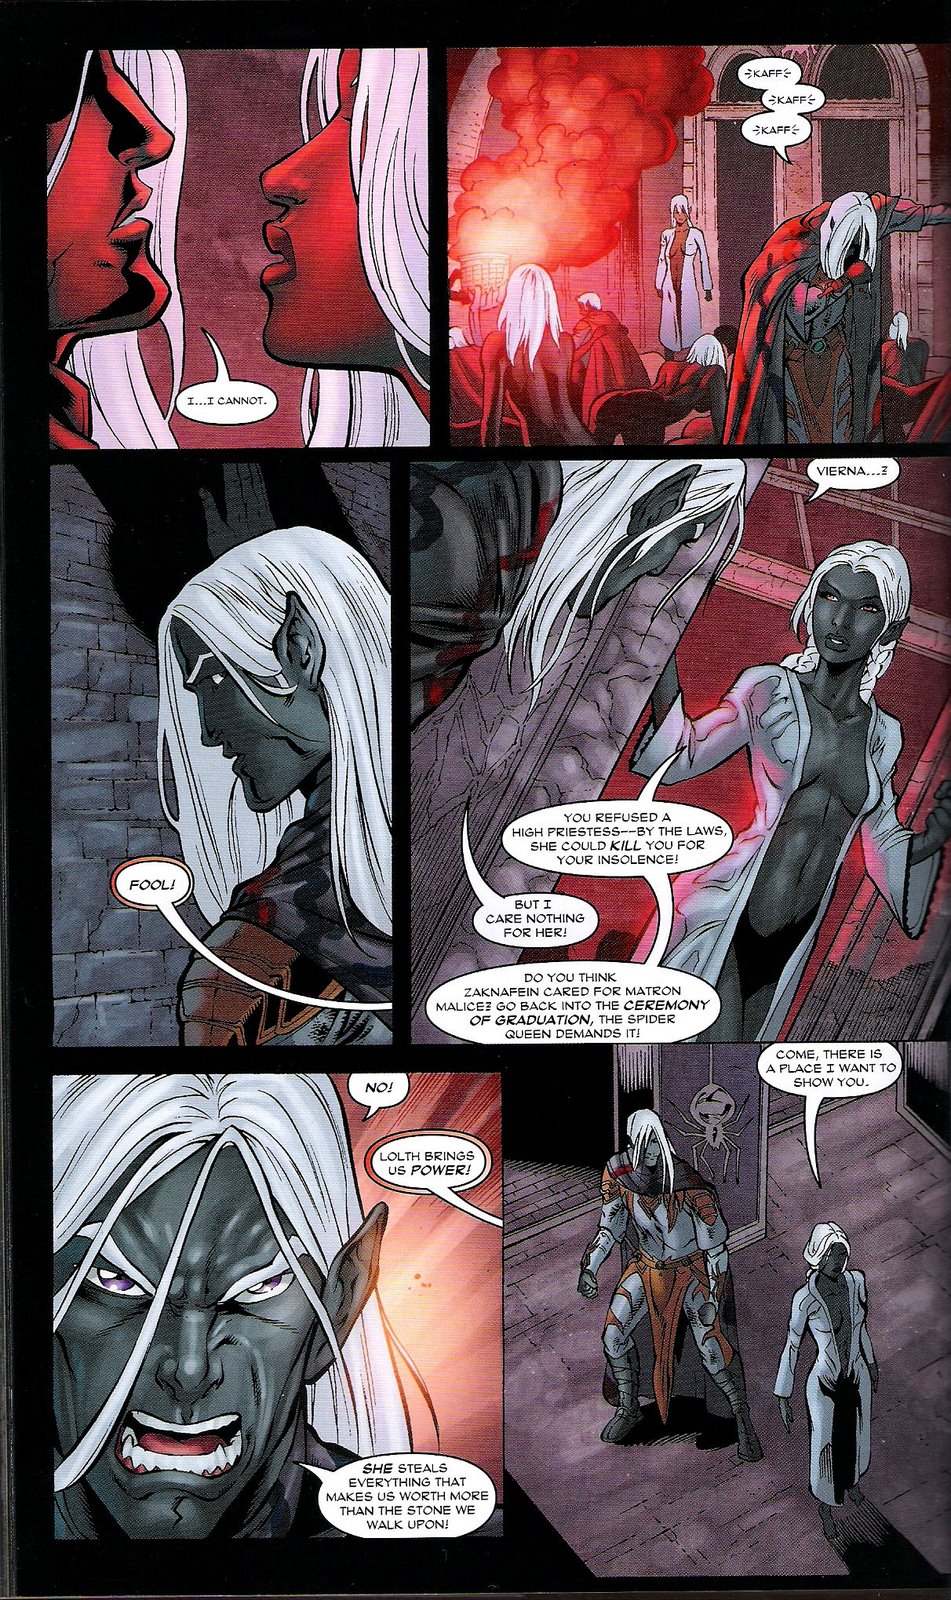 [The+Legend+Of+Drizzt+Omnibus+Inside+Page.jpg]